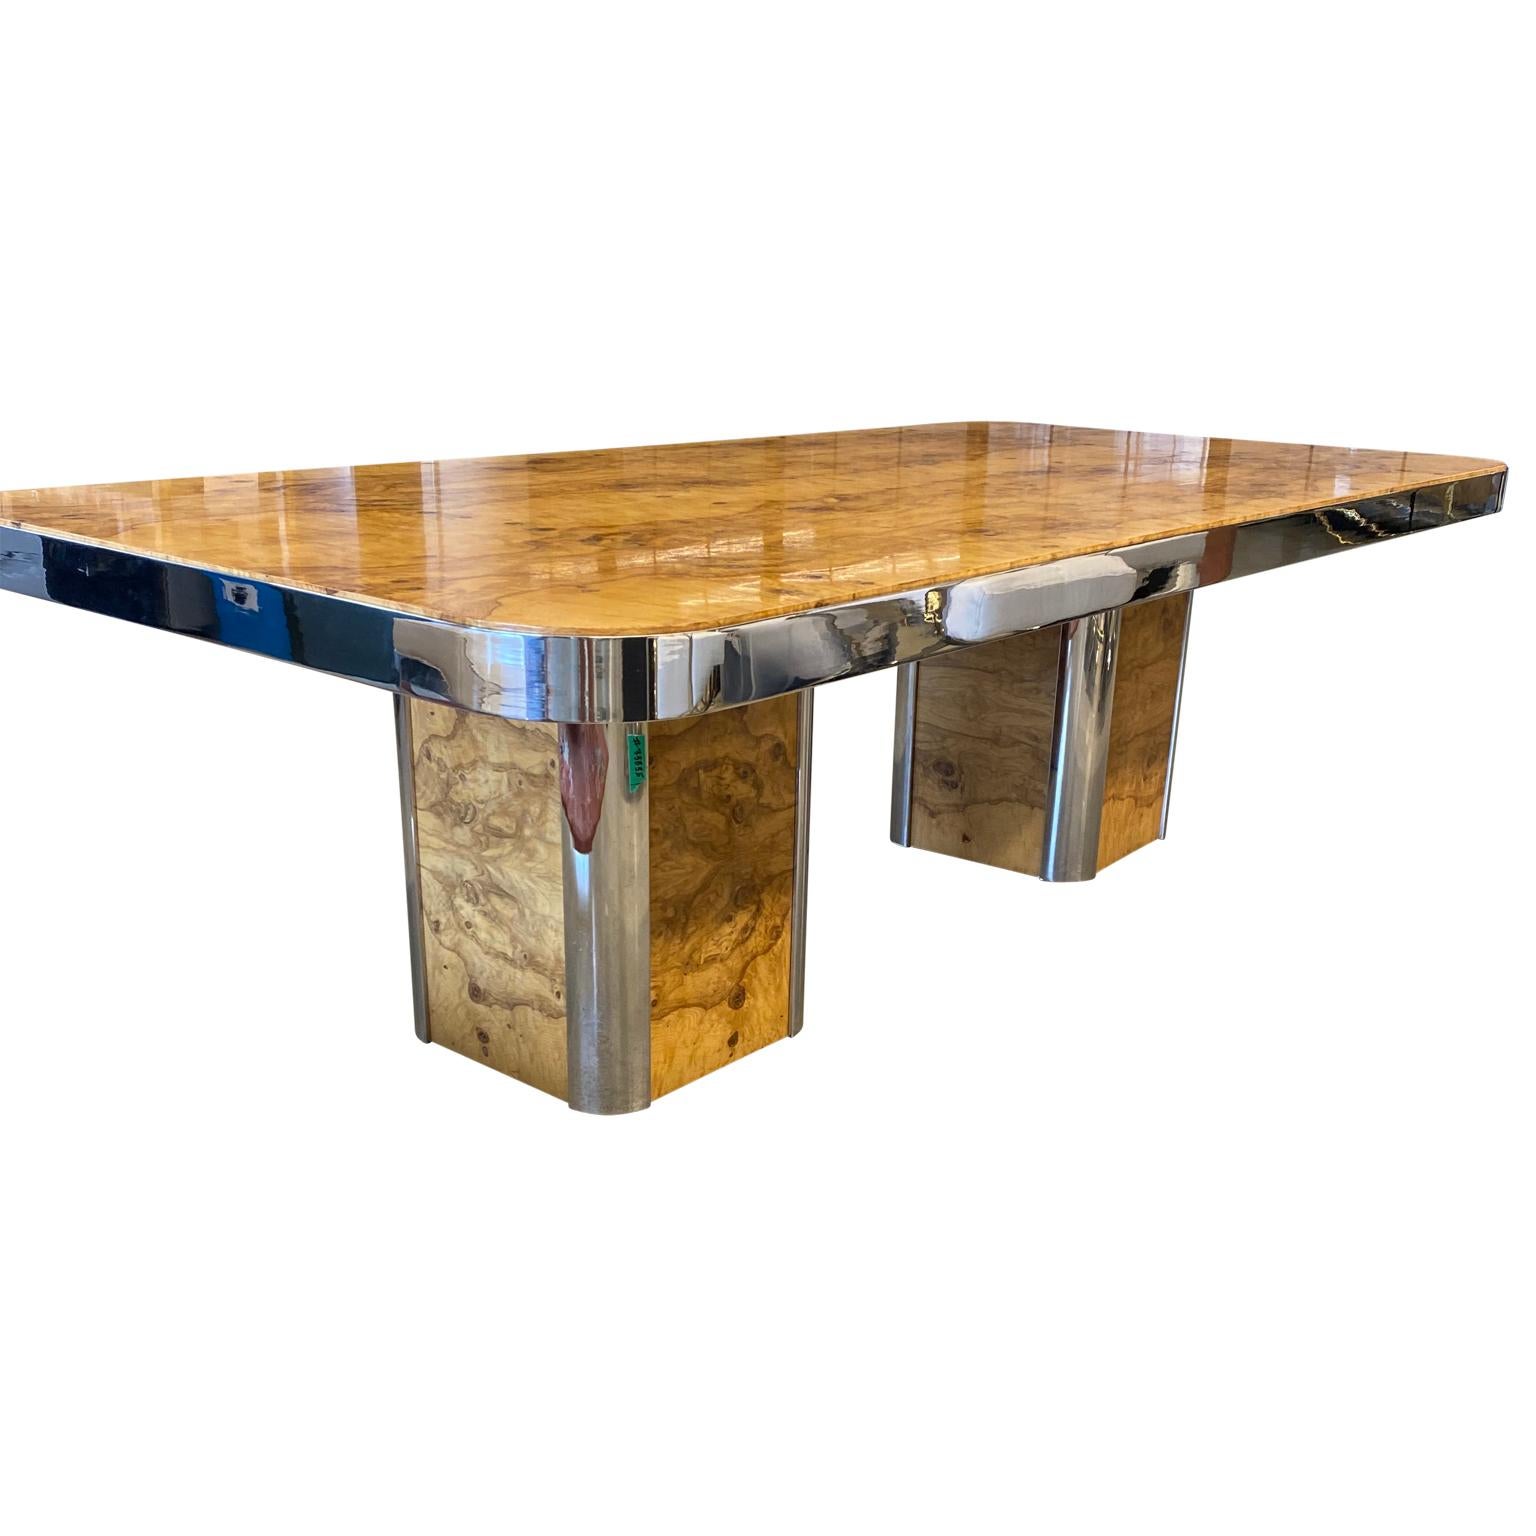 Large Pace Collection dining room table in burl wood and chrome

Pace Collection was a famous America furniture maker based in New York and operating from the 1960s until it closed in 2001. Pace worked with a large group of famous designer.
 